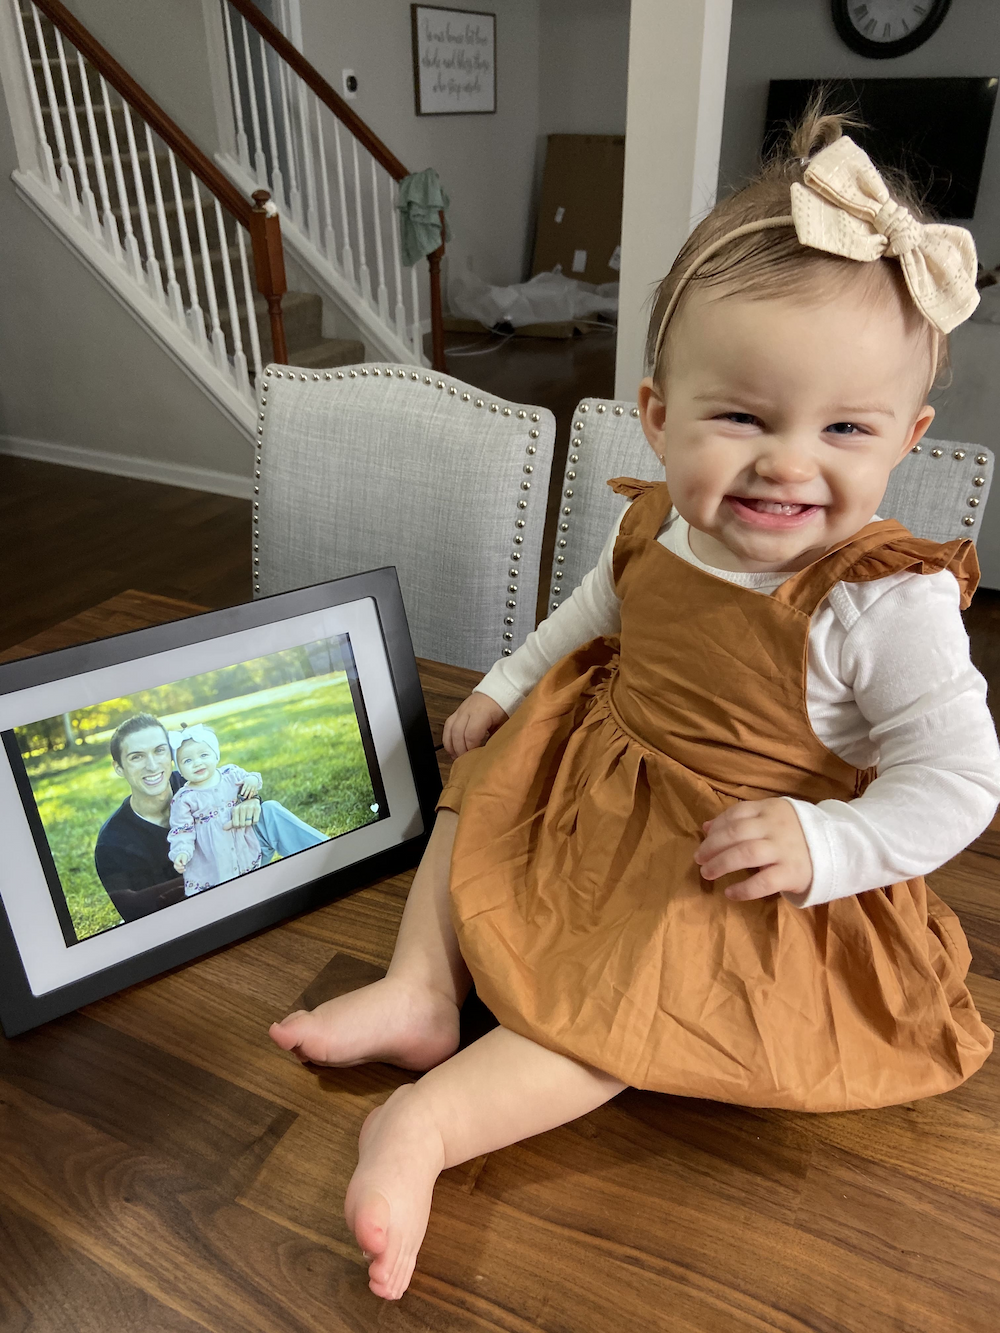 Baby next to digital photo frame with image of her and her dad